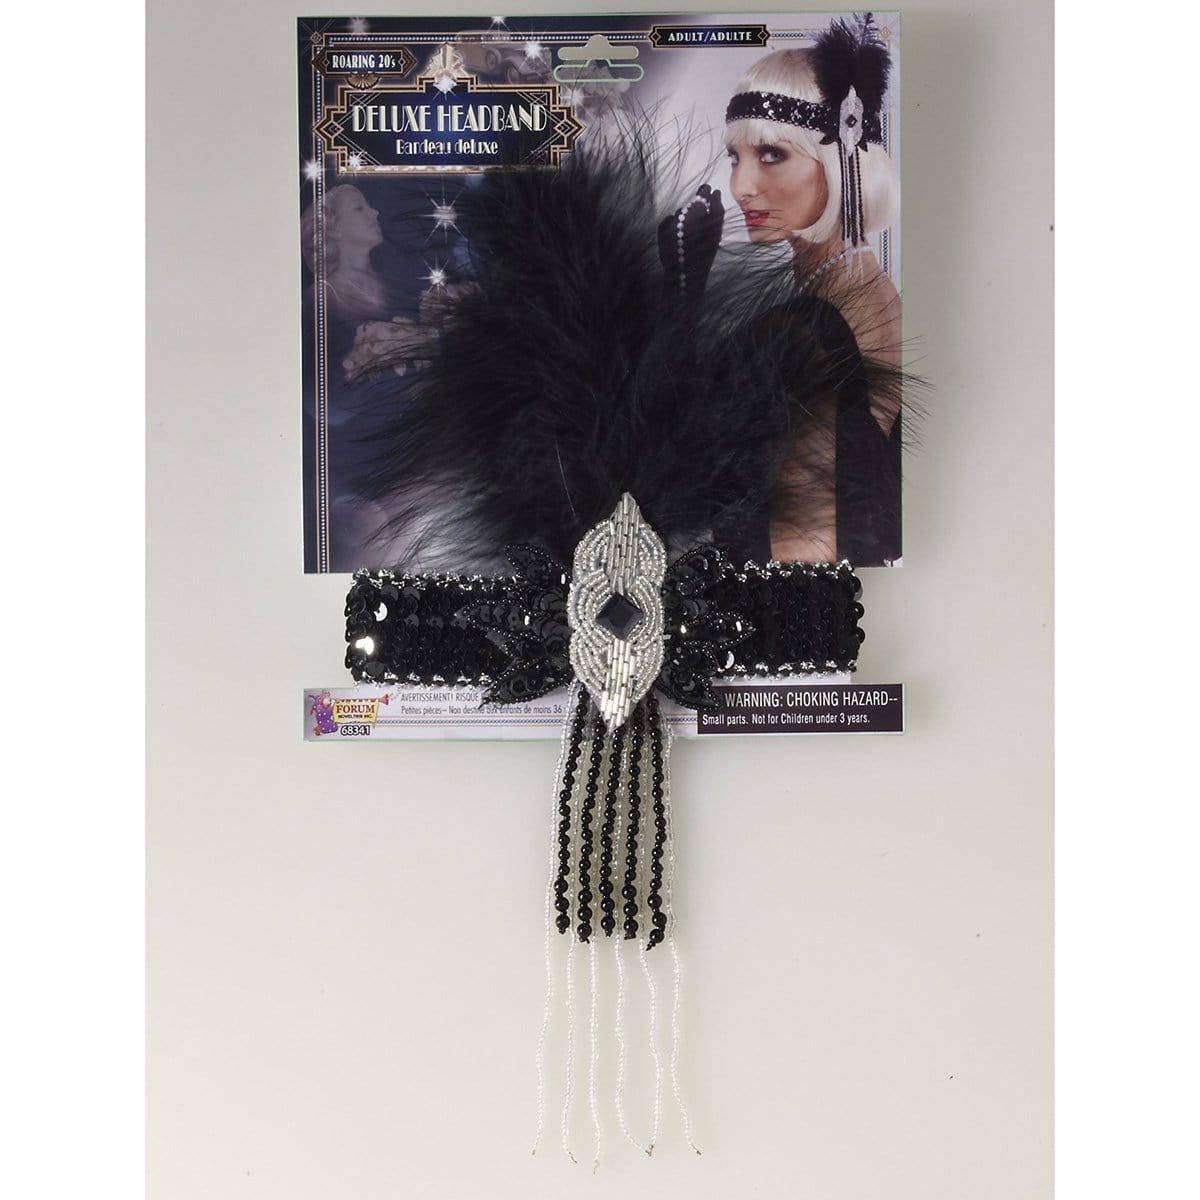 Buy Costume Accessories Black deluxe flapper headband with feathers sold at Party Expert